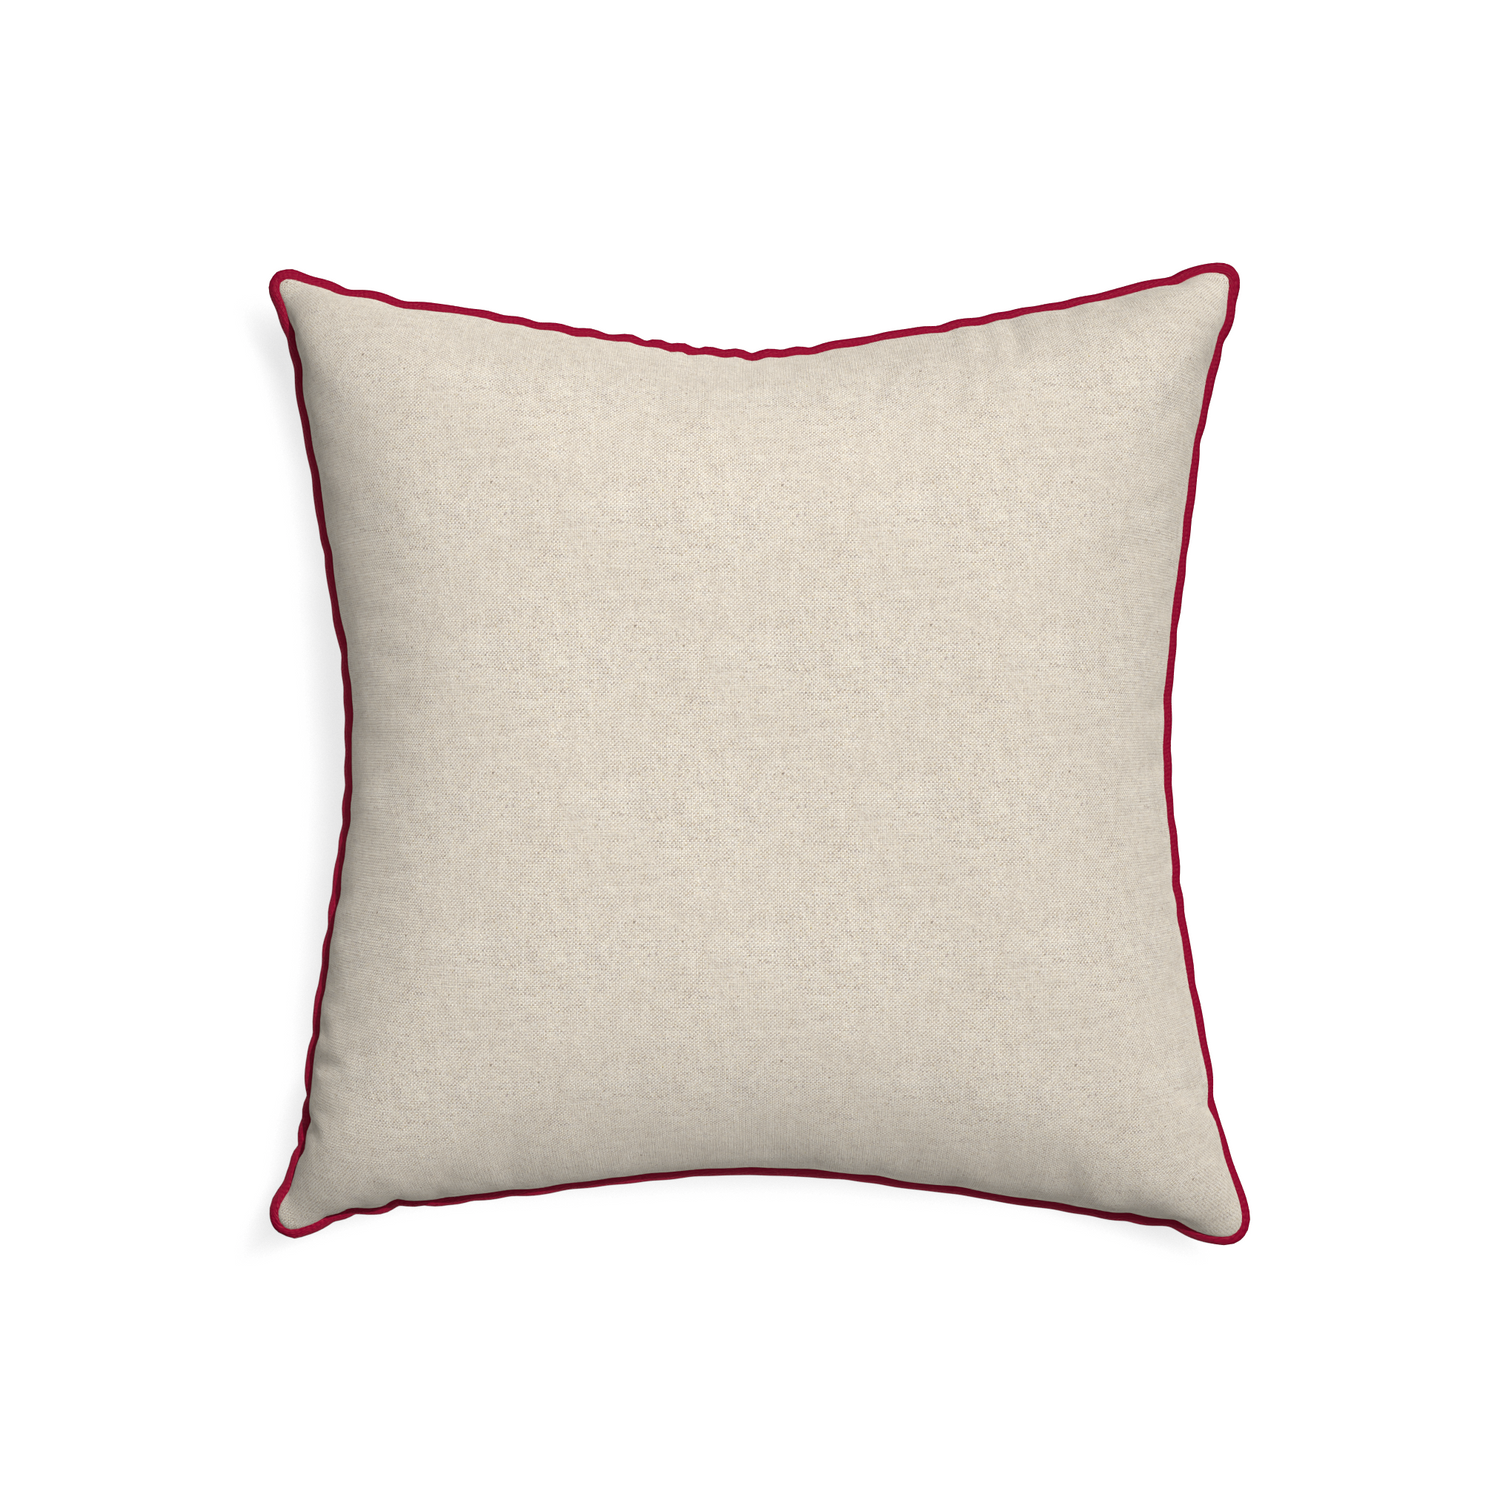 22-square oat custom light brownpillow with raspberry piping on white background